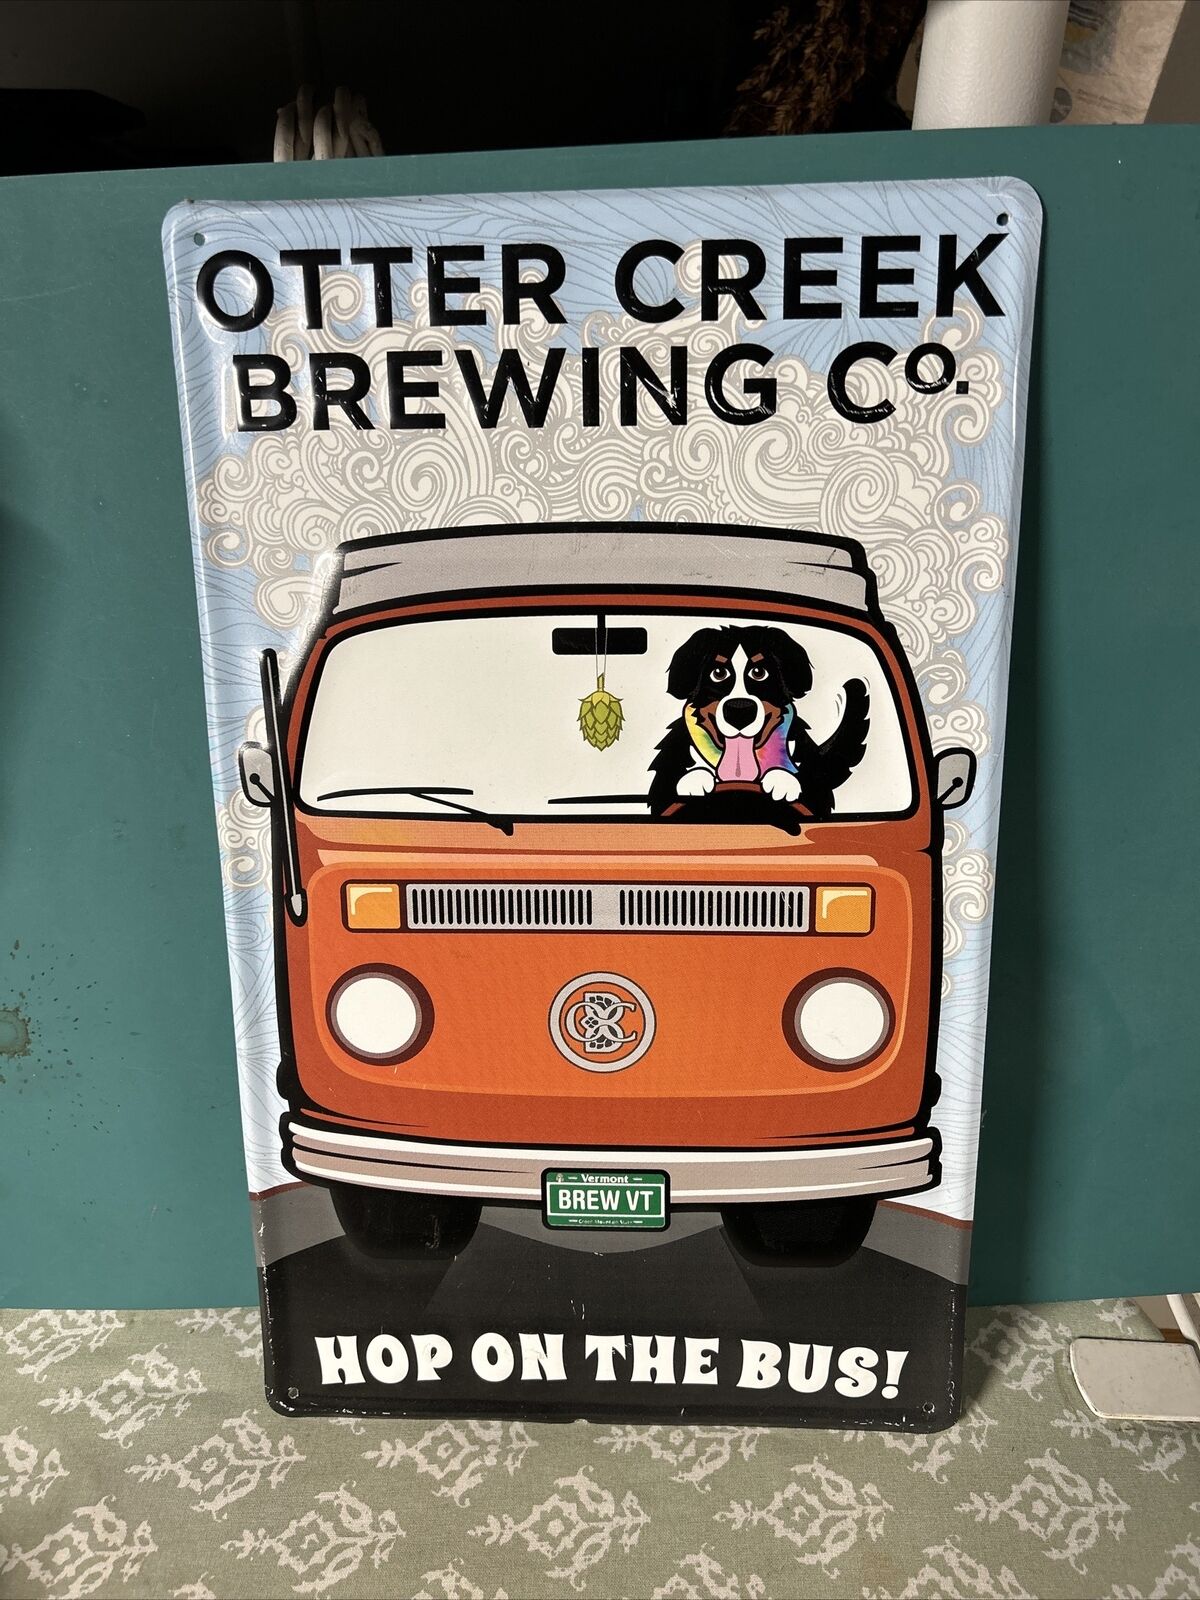 RARE OTTER CREEK BREWING SIGN HOP ON THE BUS VW BERNER DOG Approx 18”x11”